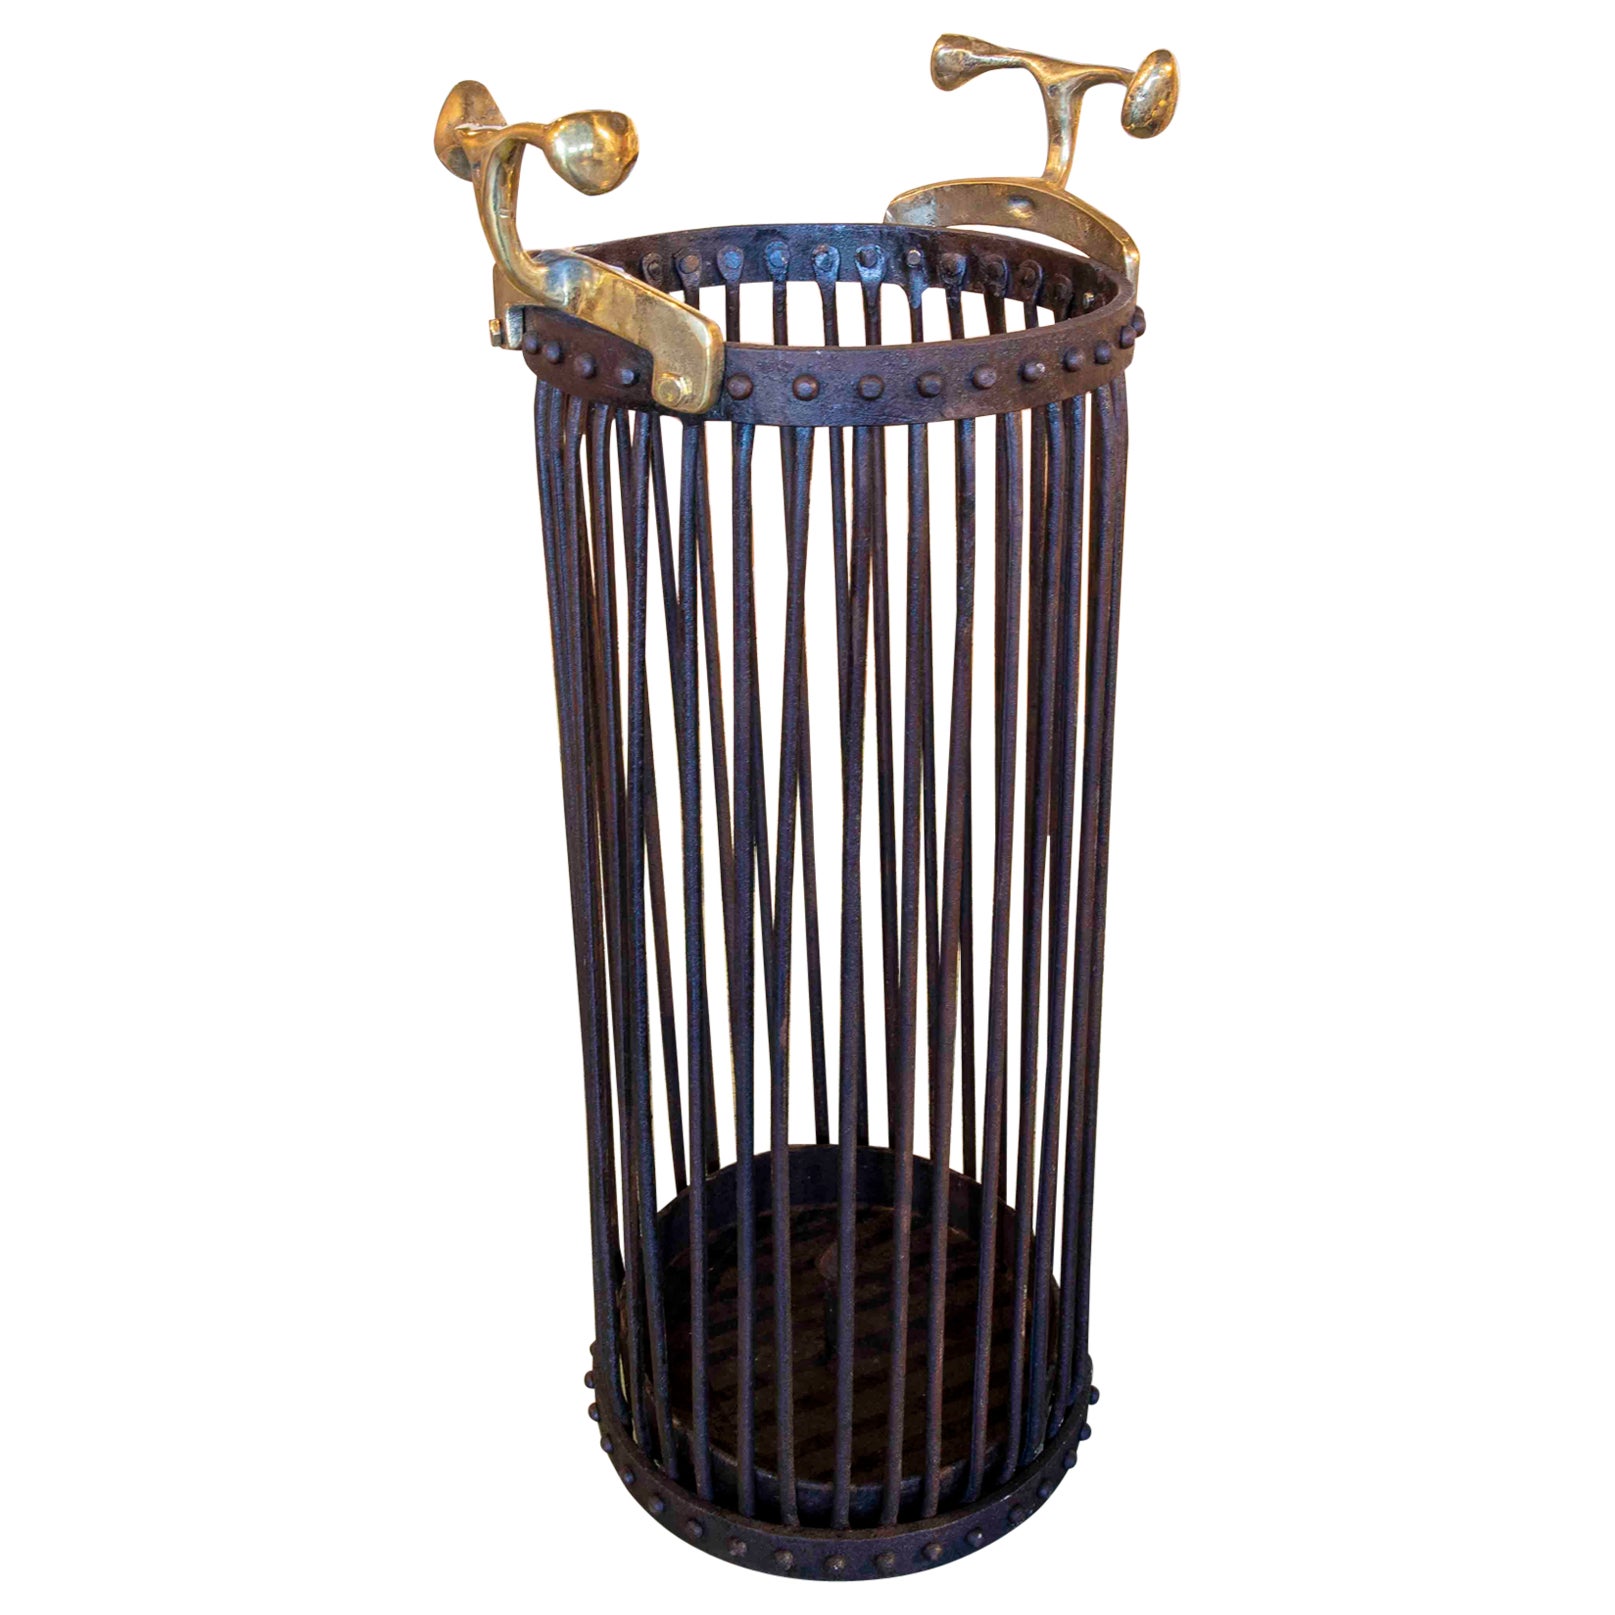  1980s Iron Umbrella Stand with Bronze Handles by the Artist David Marshall For Sale